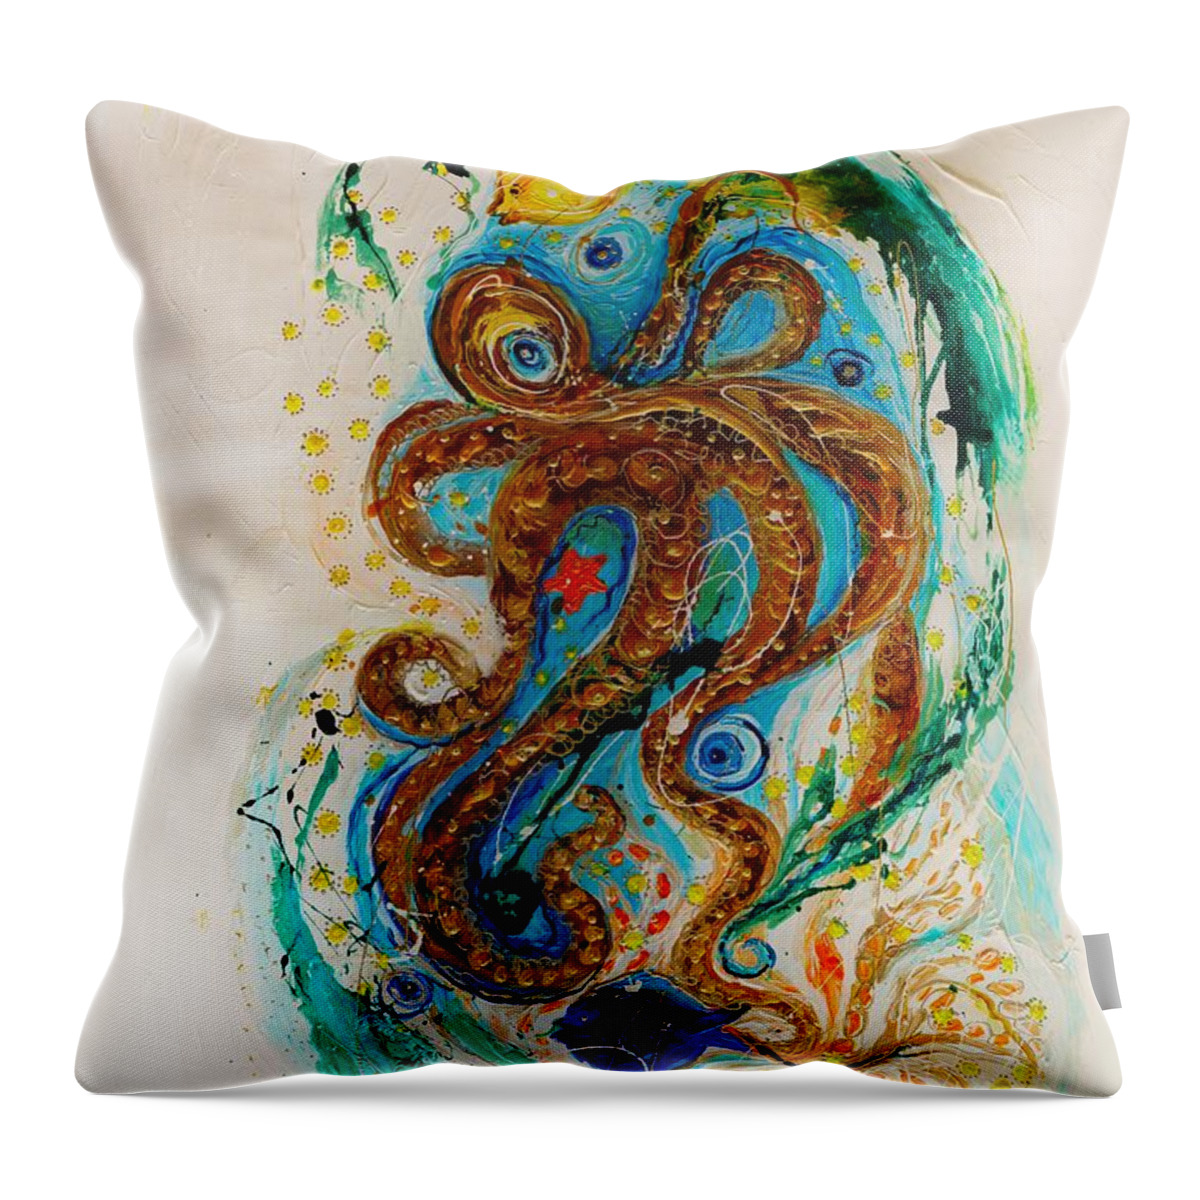 Sea Life Throw Pillow featuring the painting Mare nostrum series #10 by Elena Kotliarker